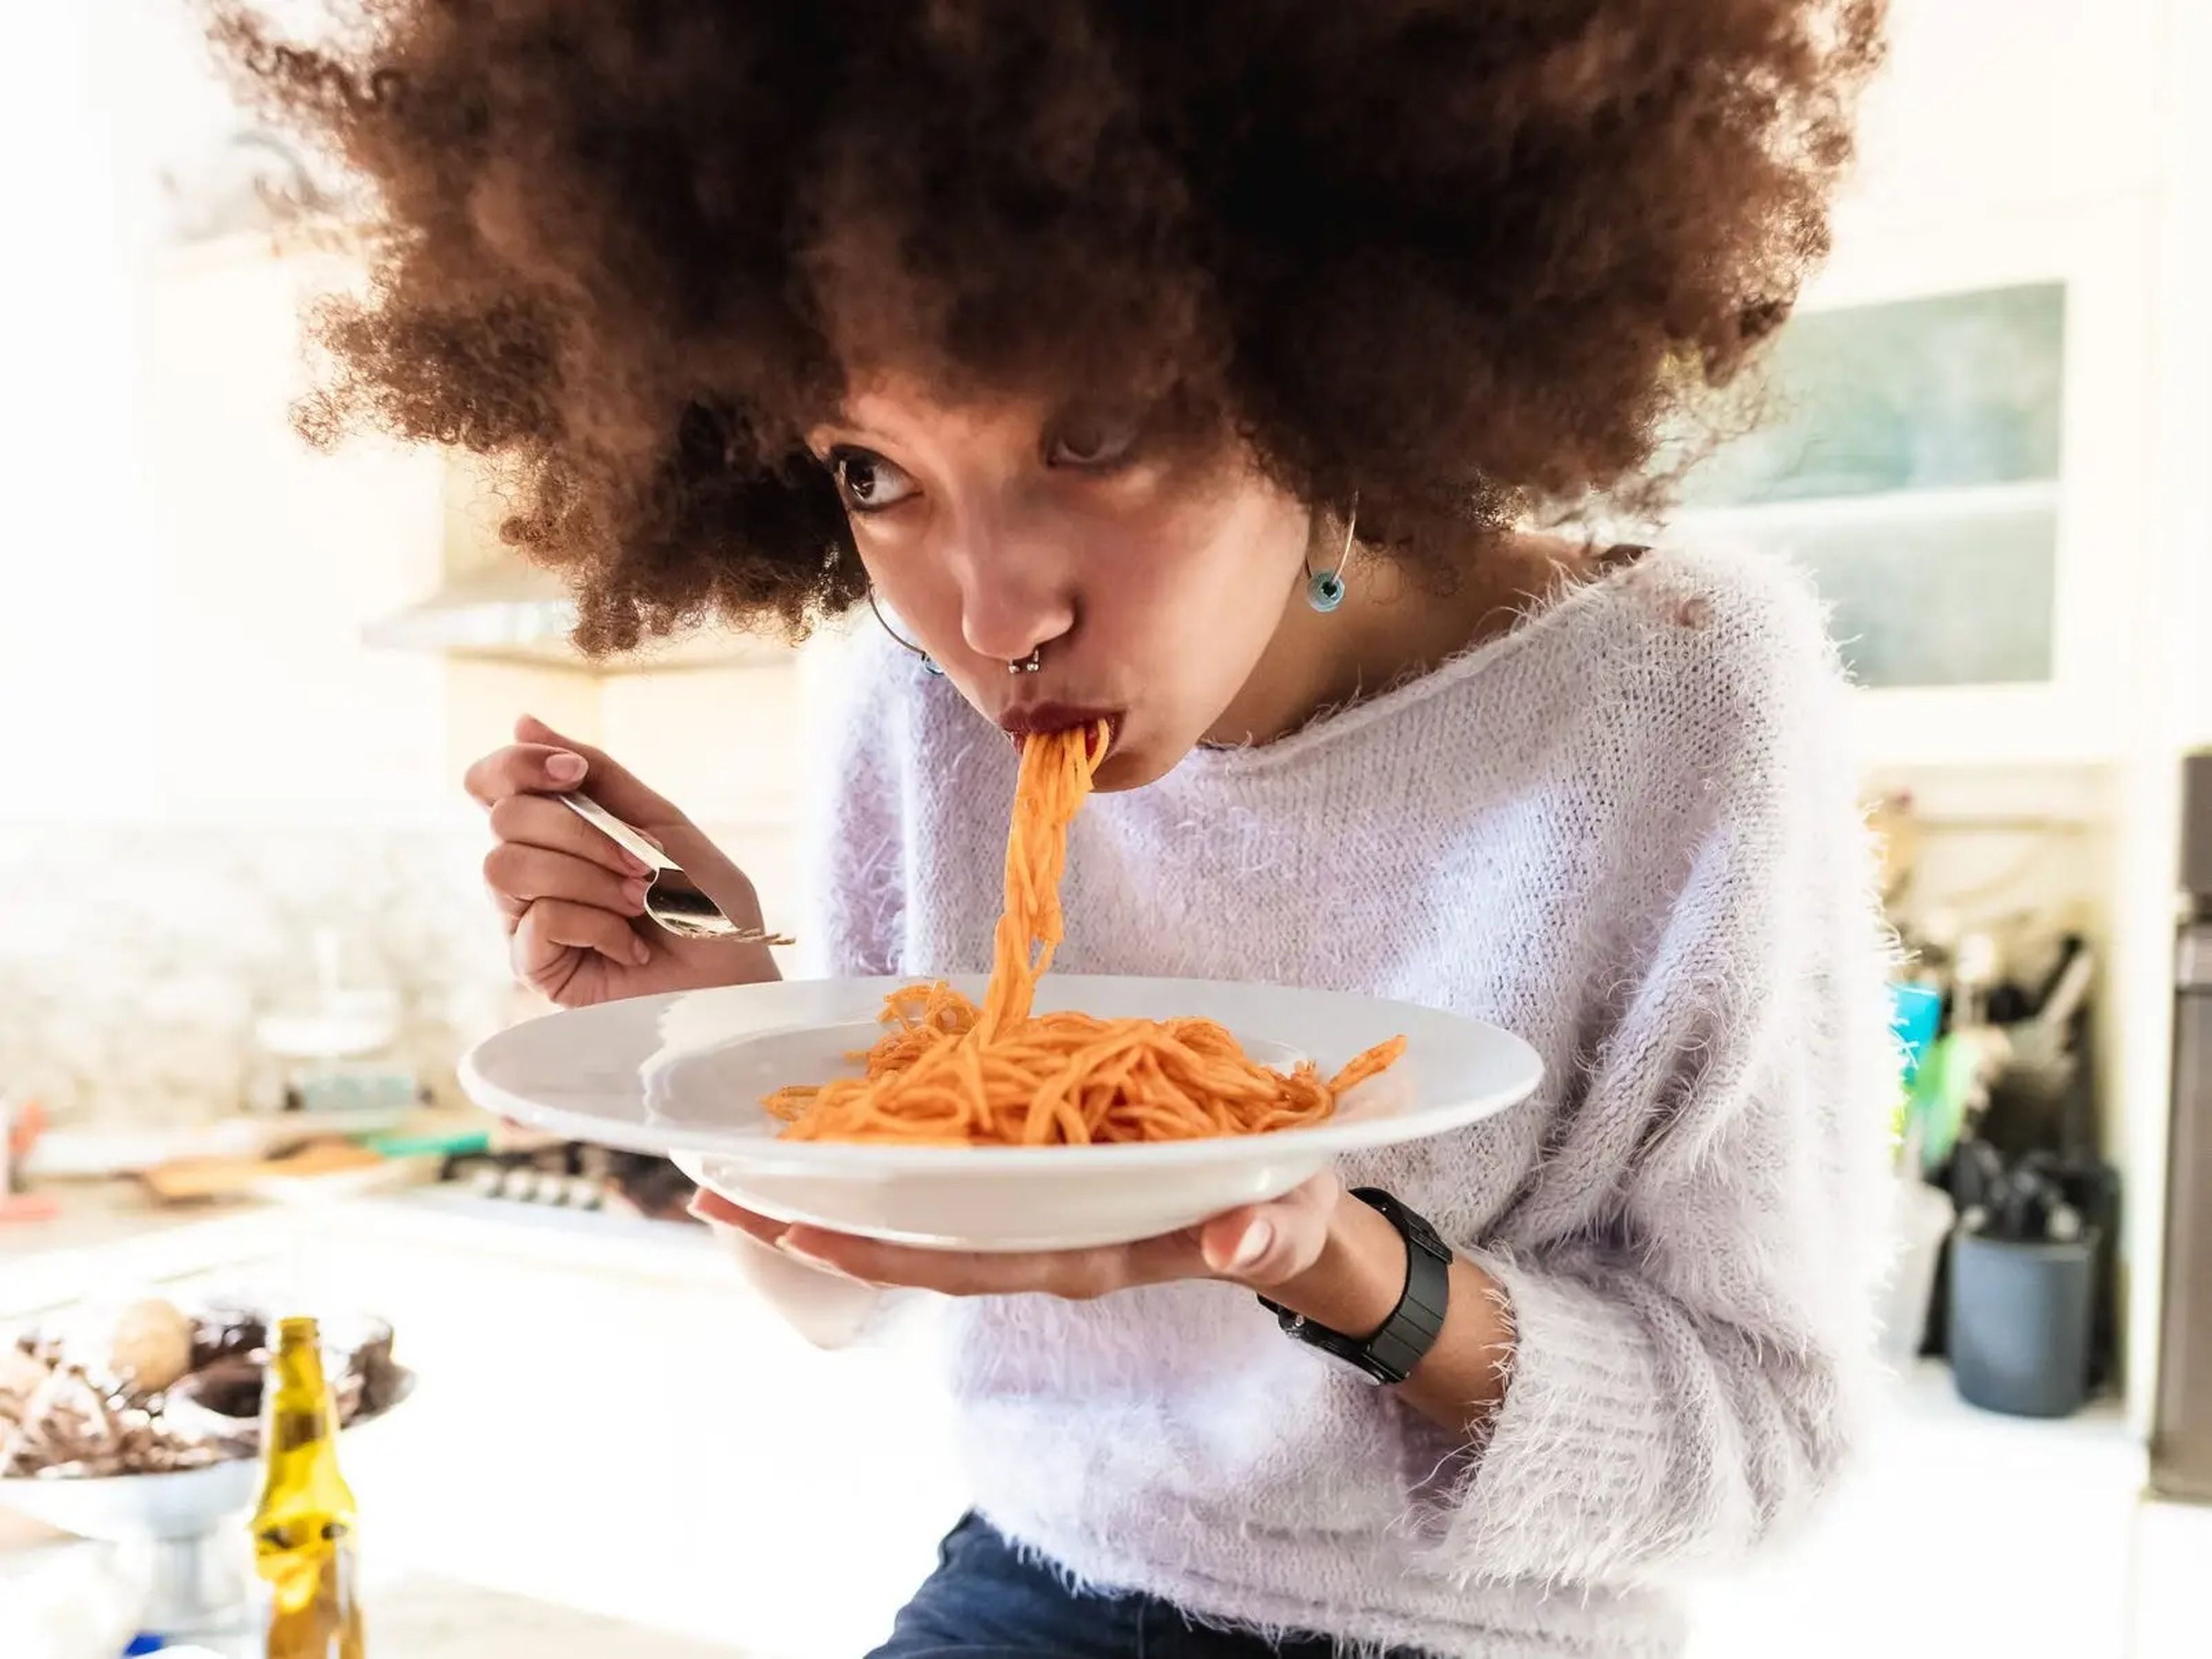 A woman eating a plate of tomato spaghetti.